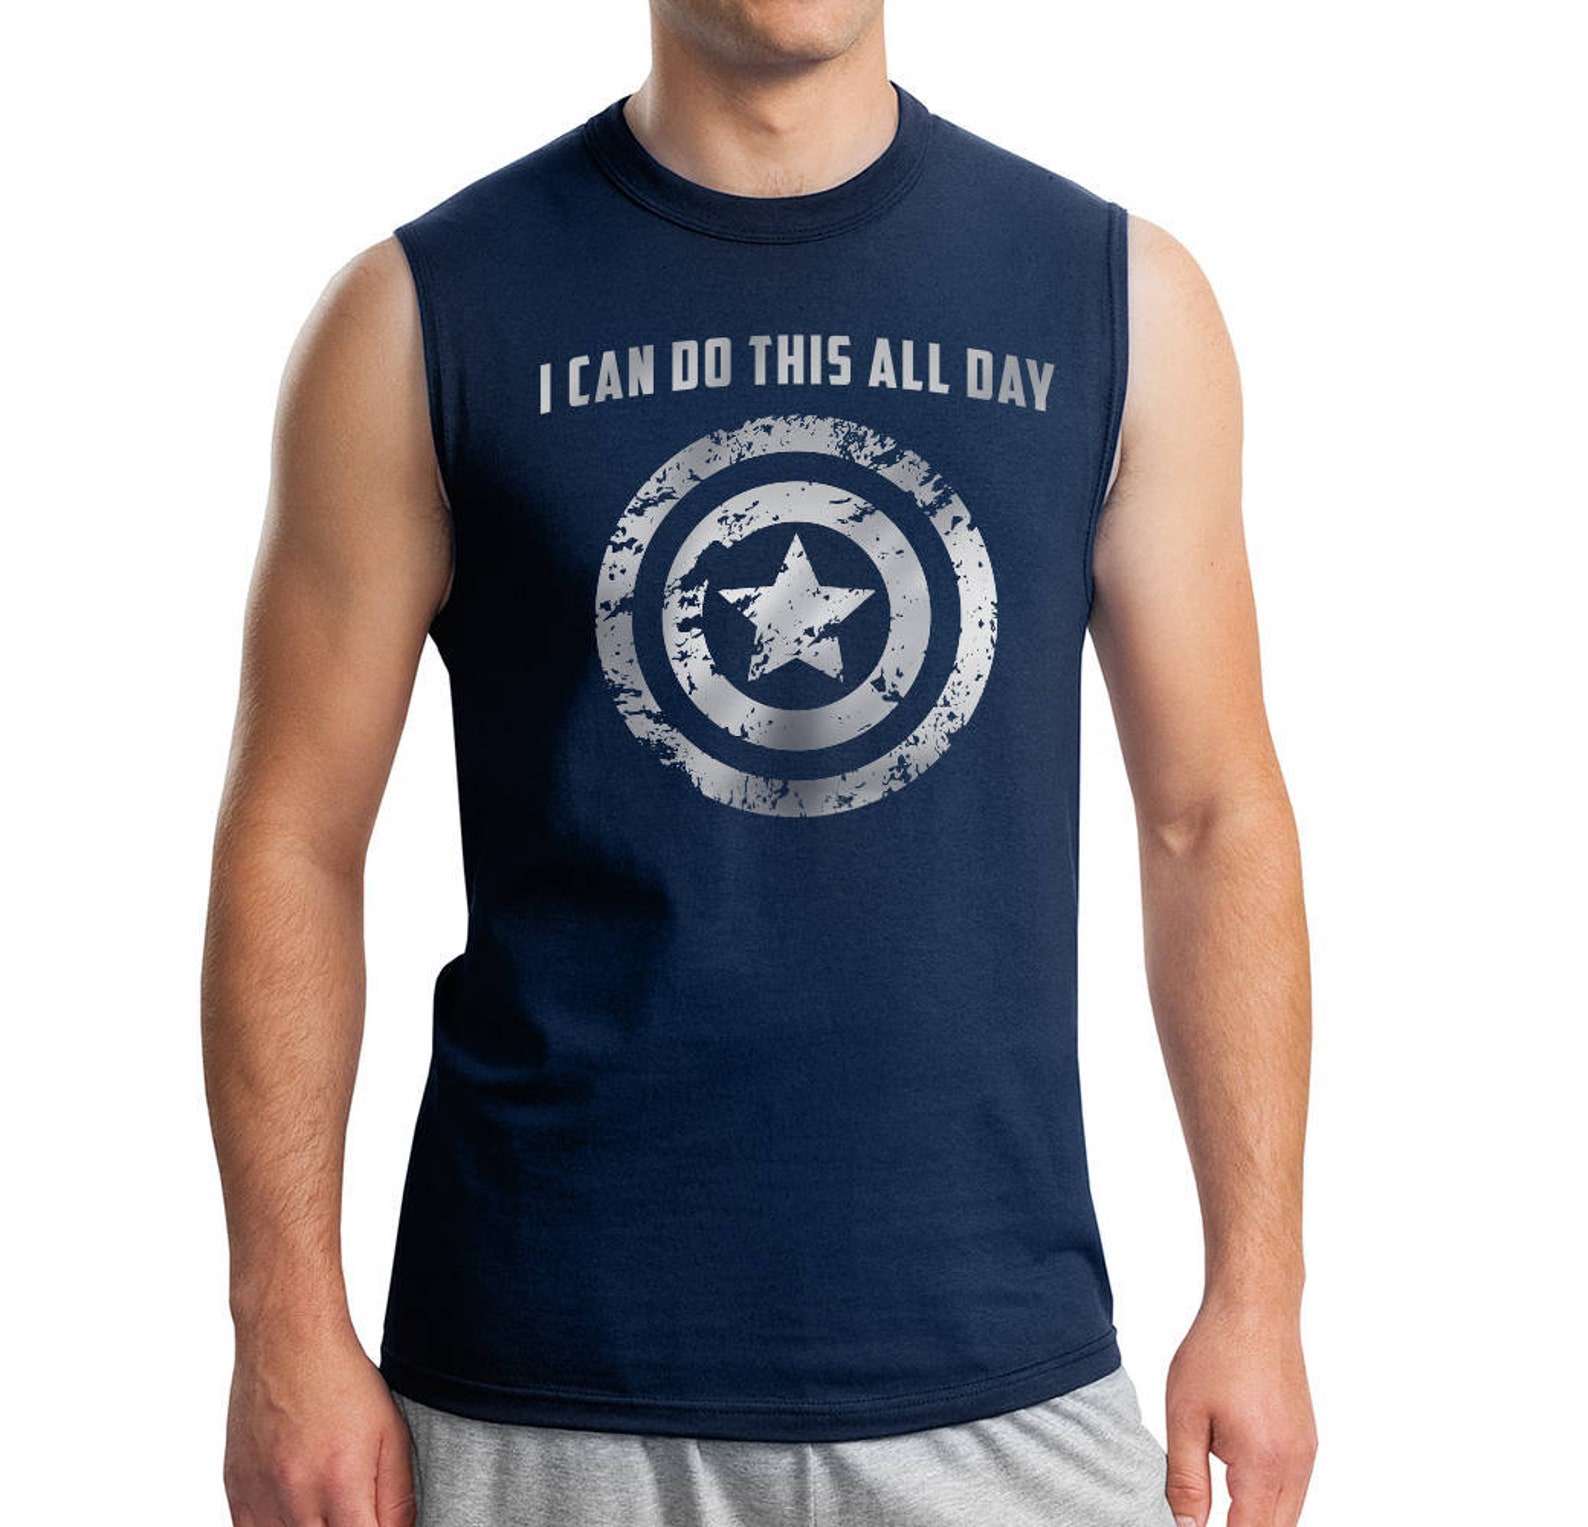 Tank Captain America: I Can Do This All Day Men's Guy - Etsy